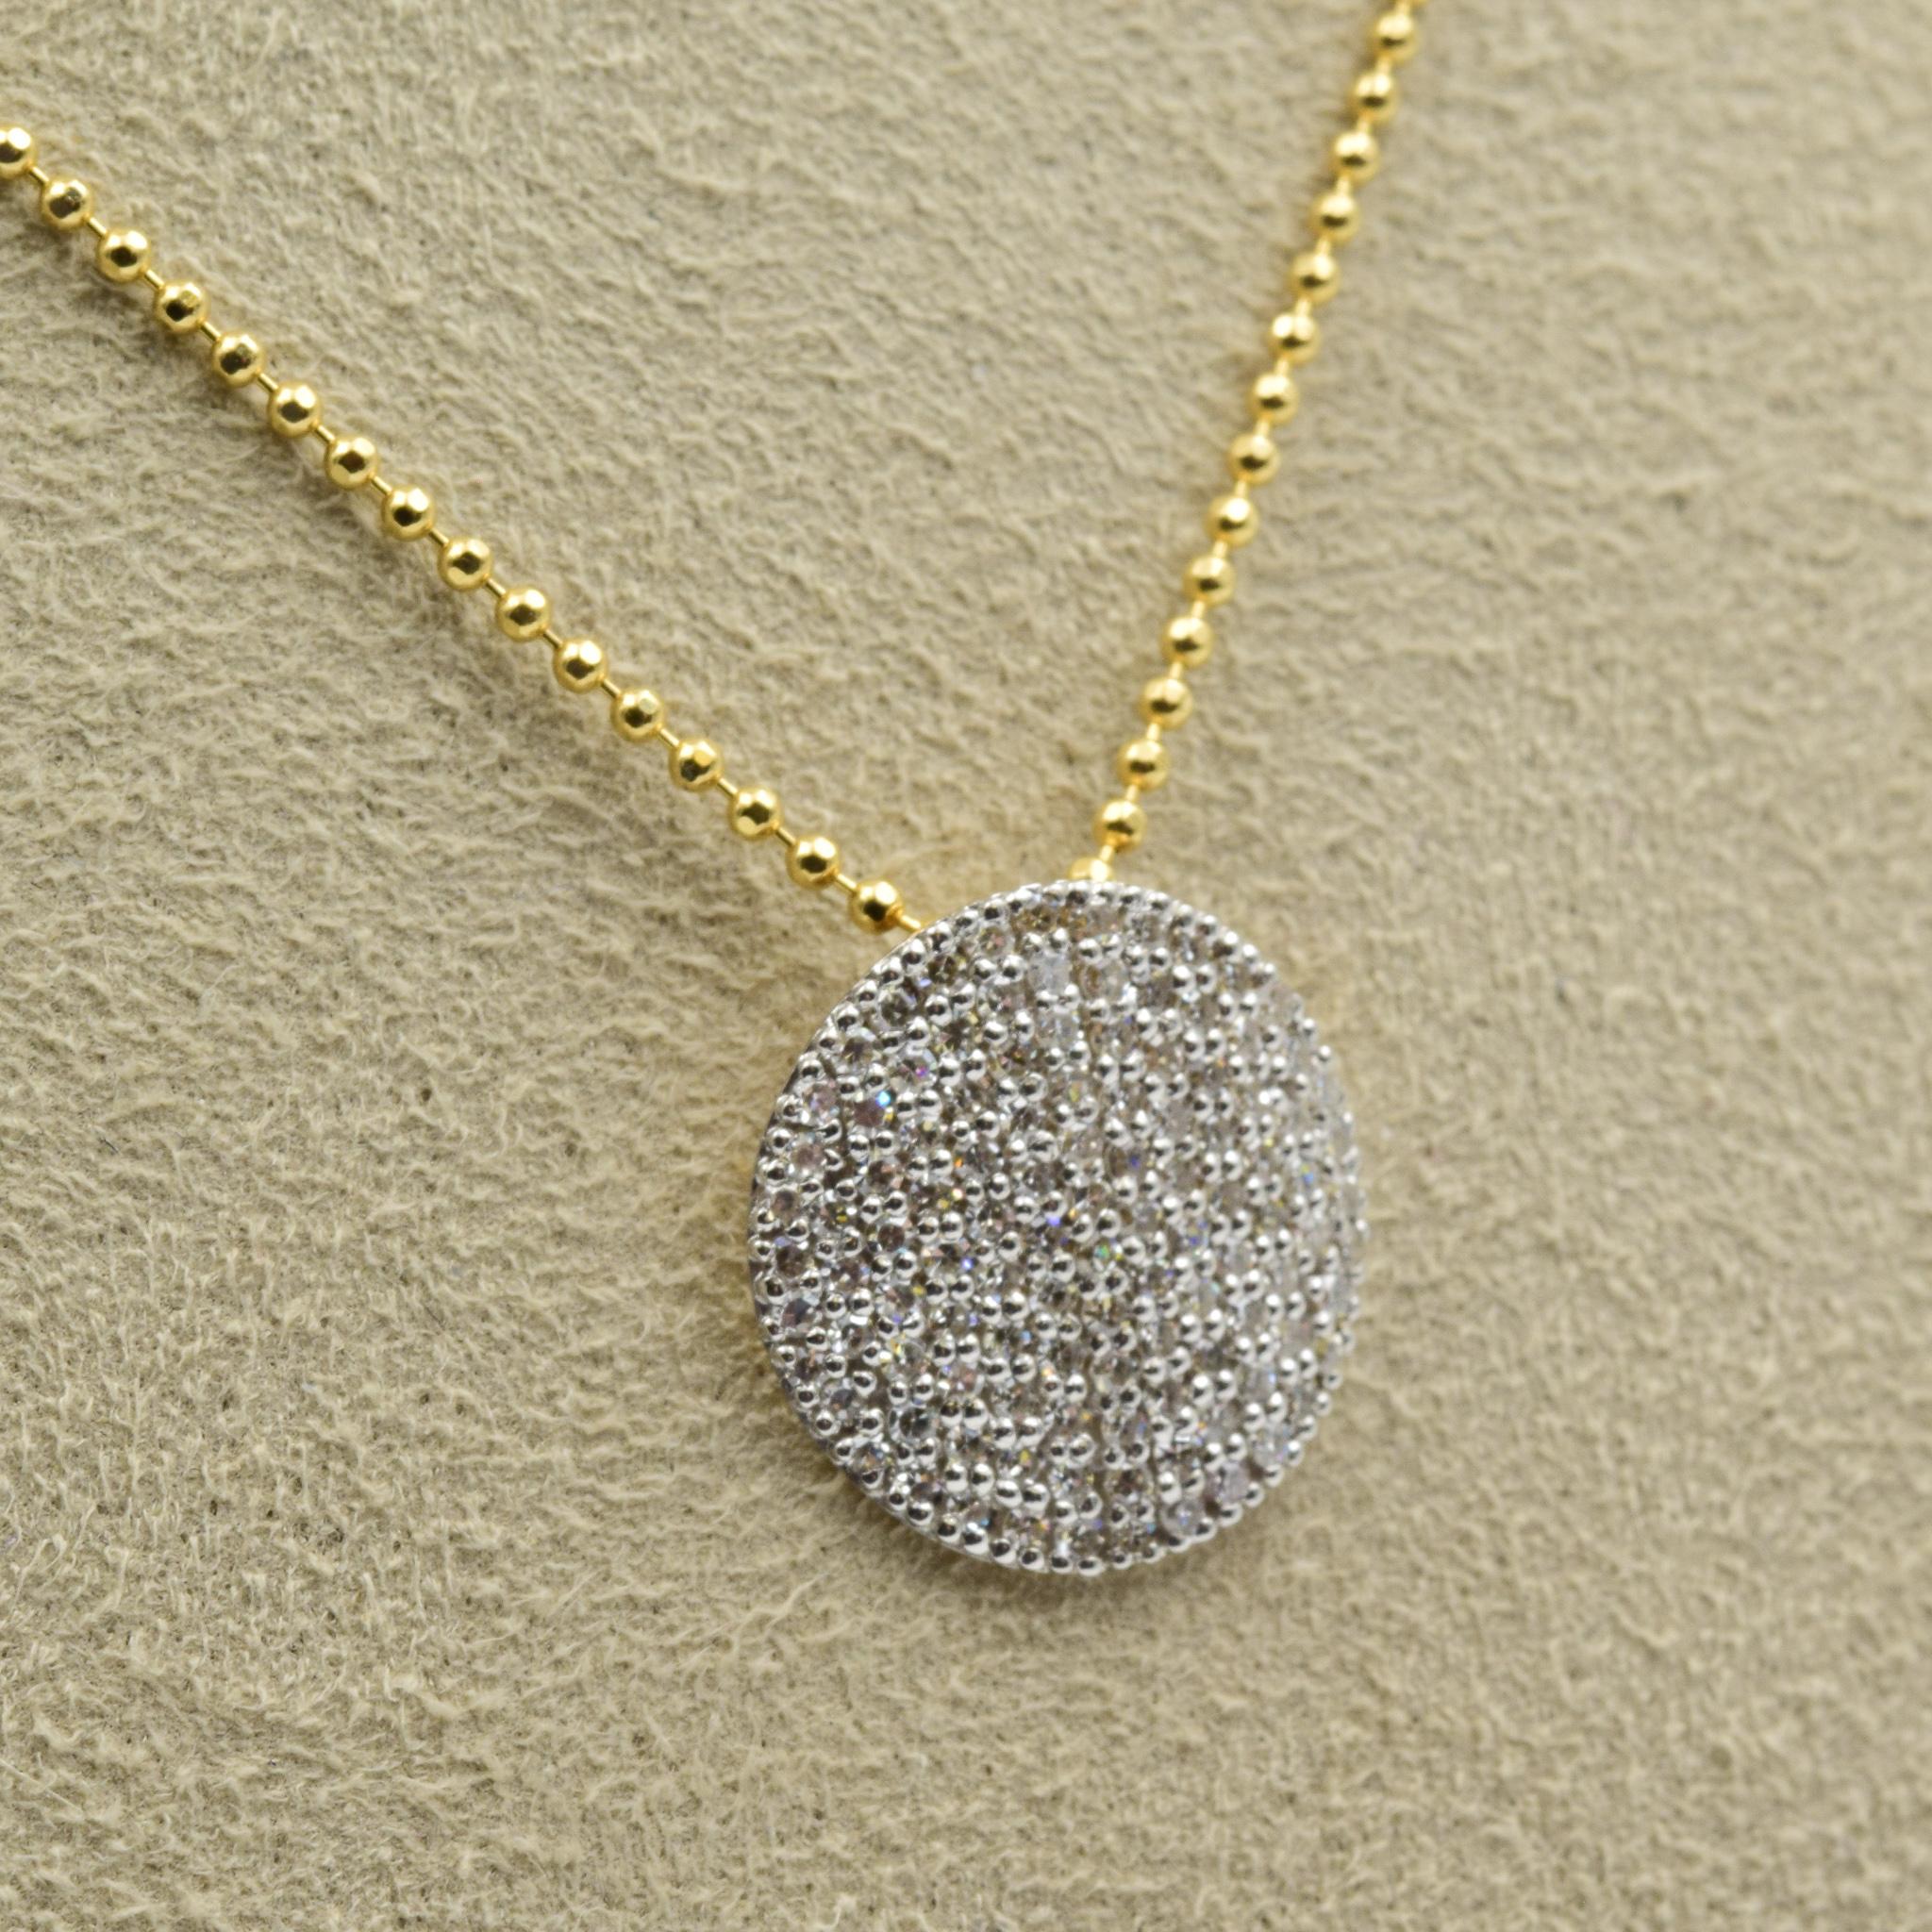 Gold and diamond large Infinity necklace (1.00 tcw)
The defining interpretation of gold and diamonds, in classically chic Phillips House style for everyday.
Style Number: N20223PDY
Length: 18